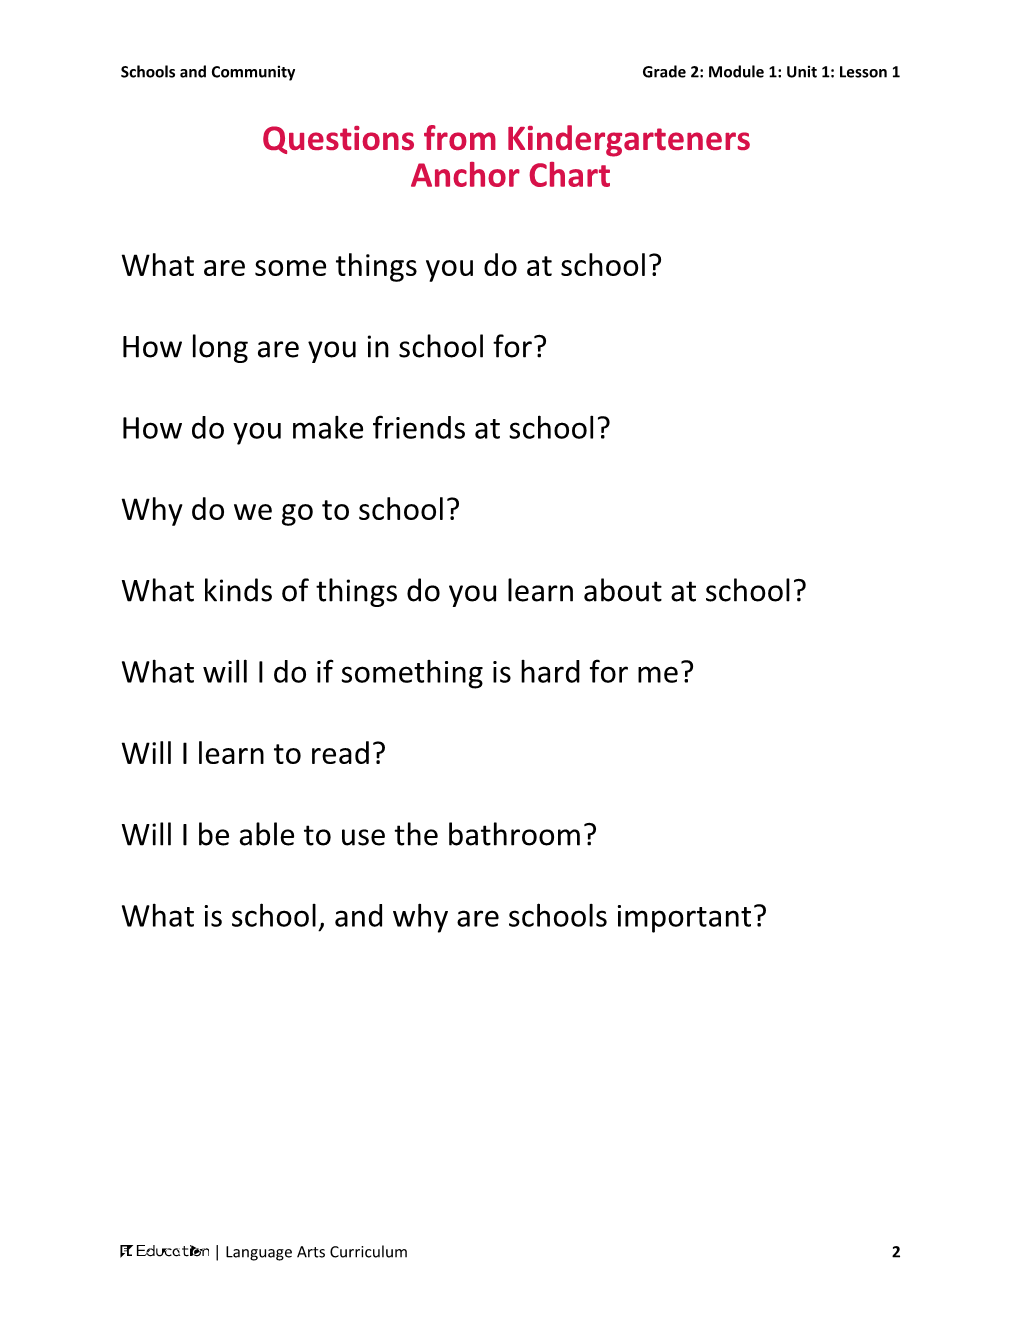 Questions from Kindergarteners Anchor Chart